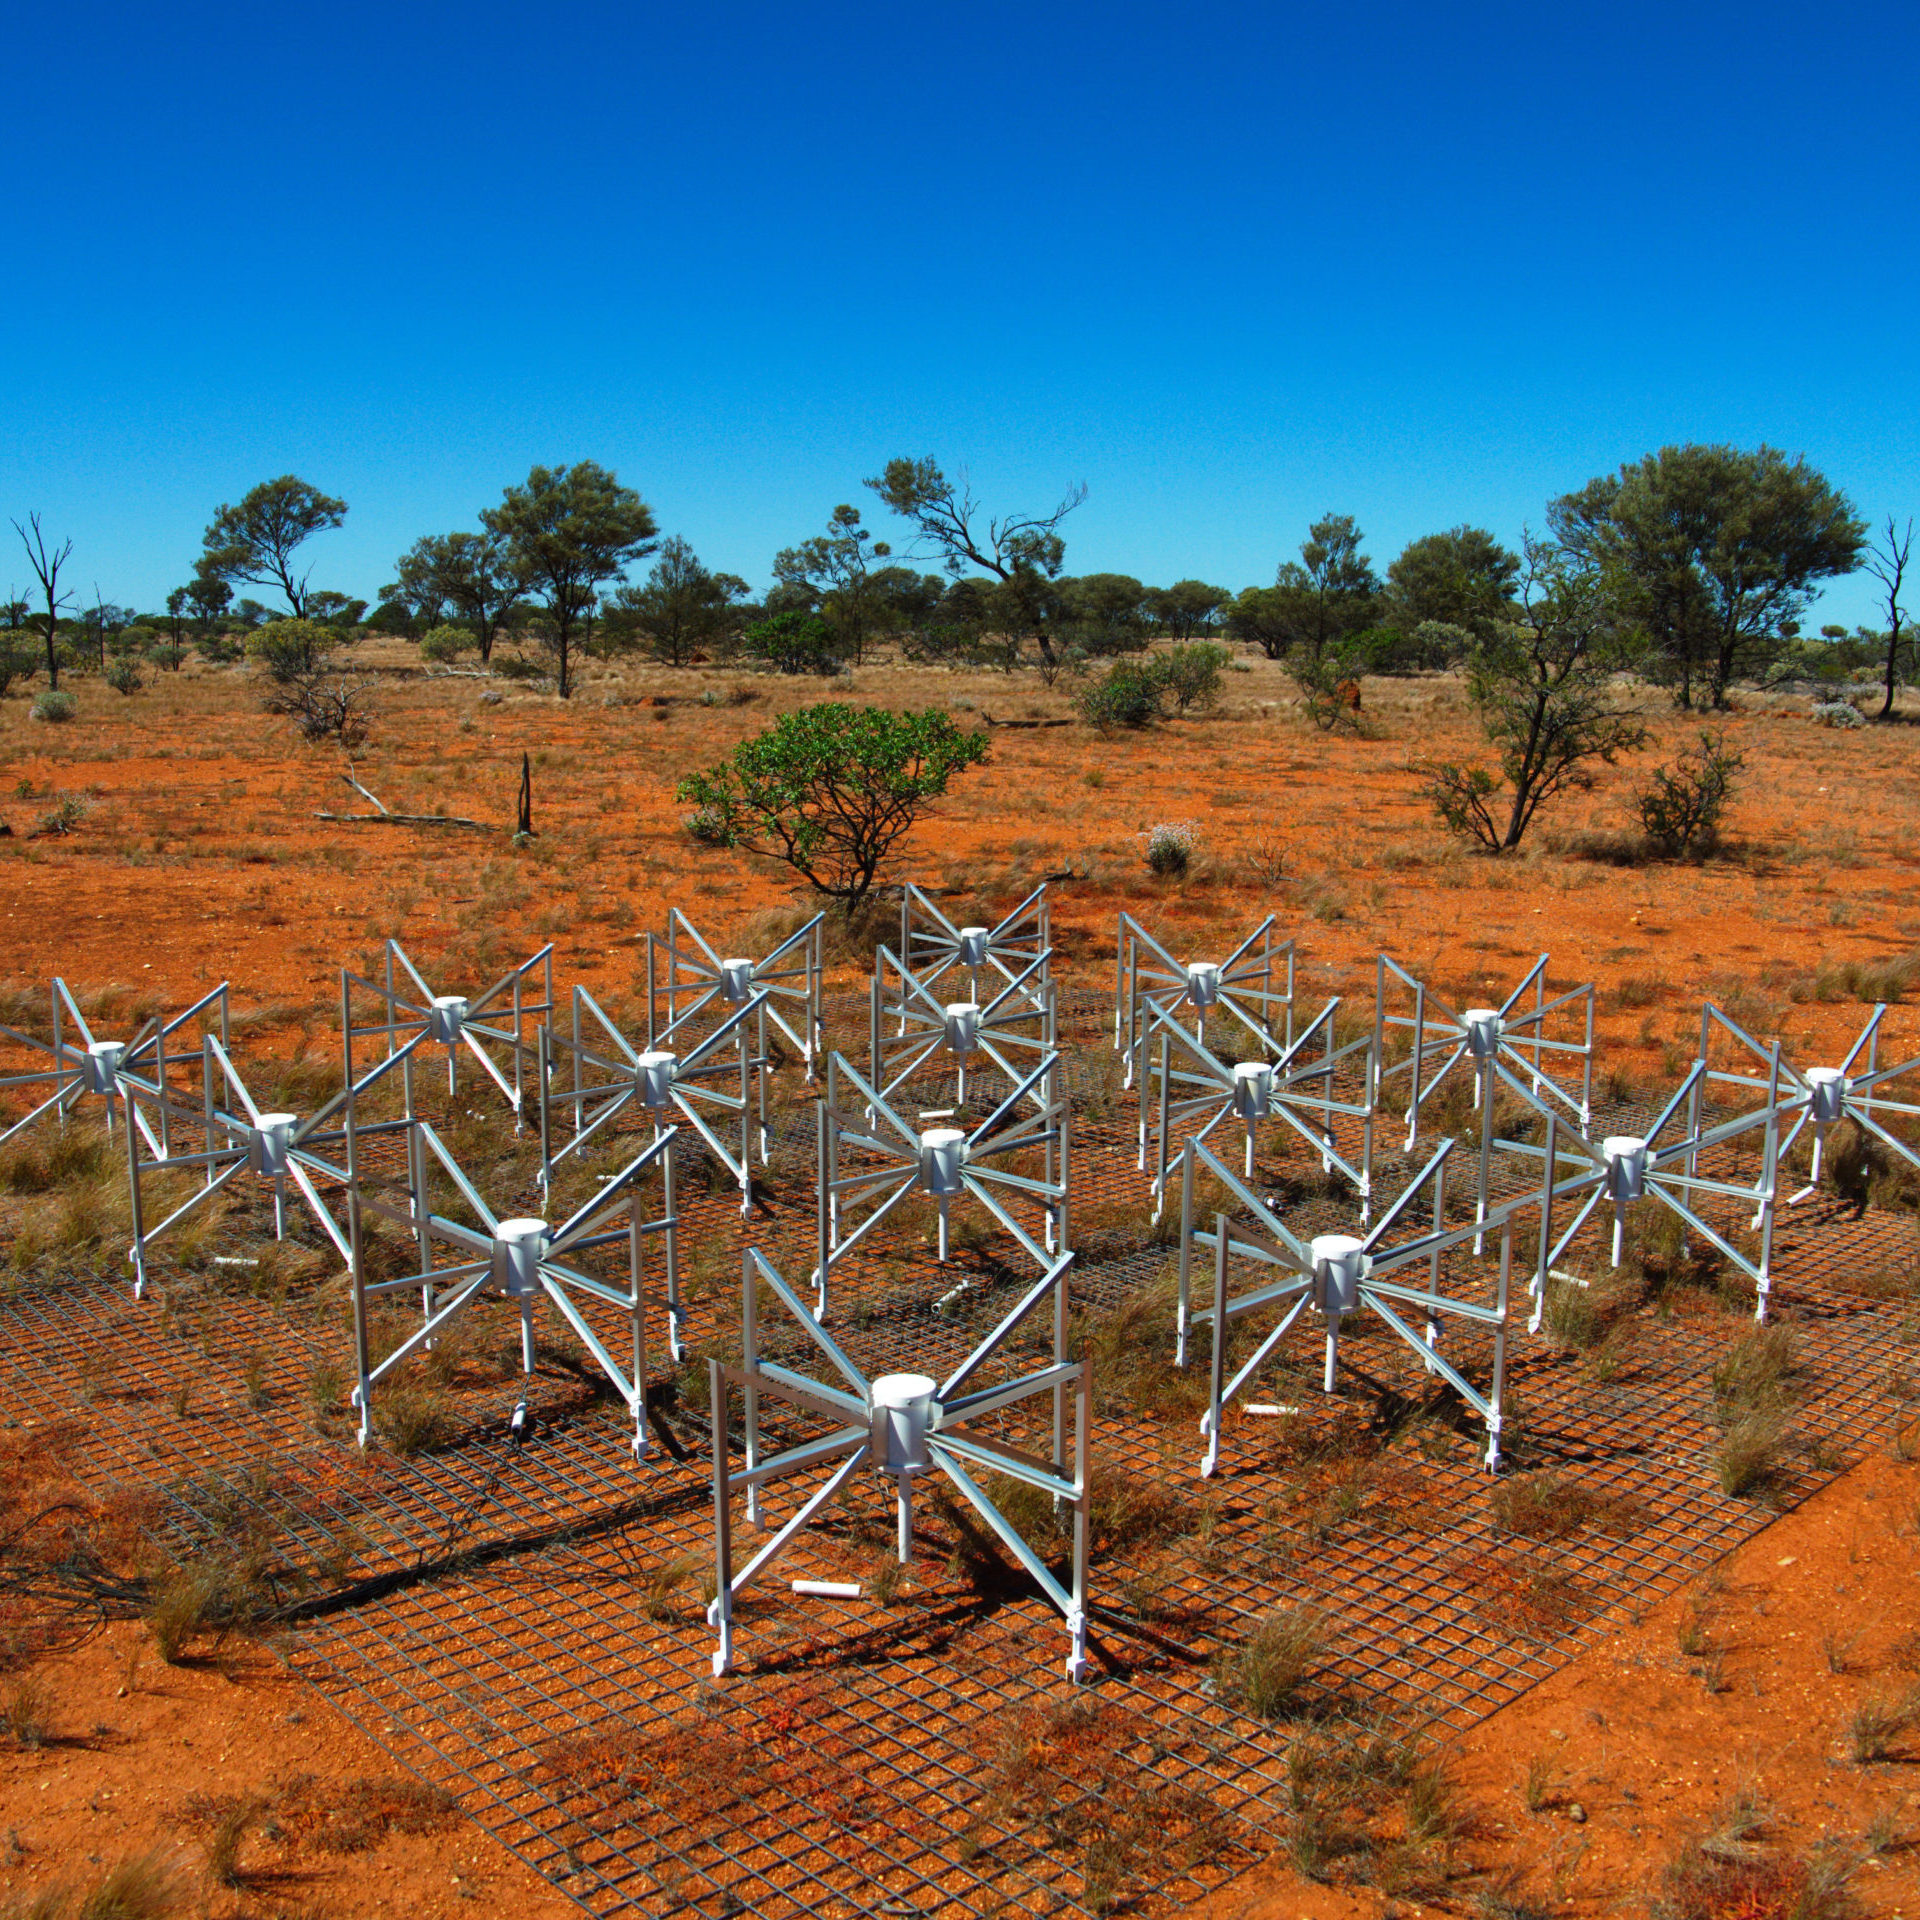 The Murchison Widefield Array. Photo: Natasha Hurley-Walker - Own work, CC BY-SA 3.0, https://commons.wikimedia.org/w/index.php?curid=18366320